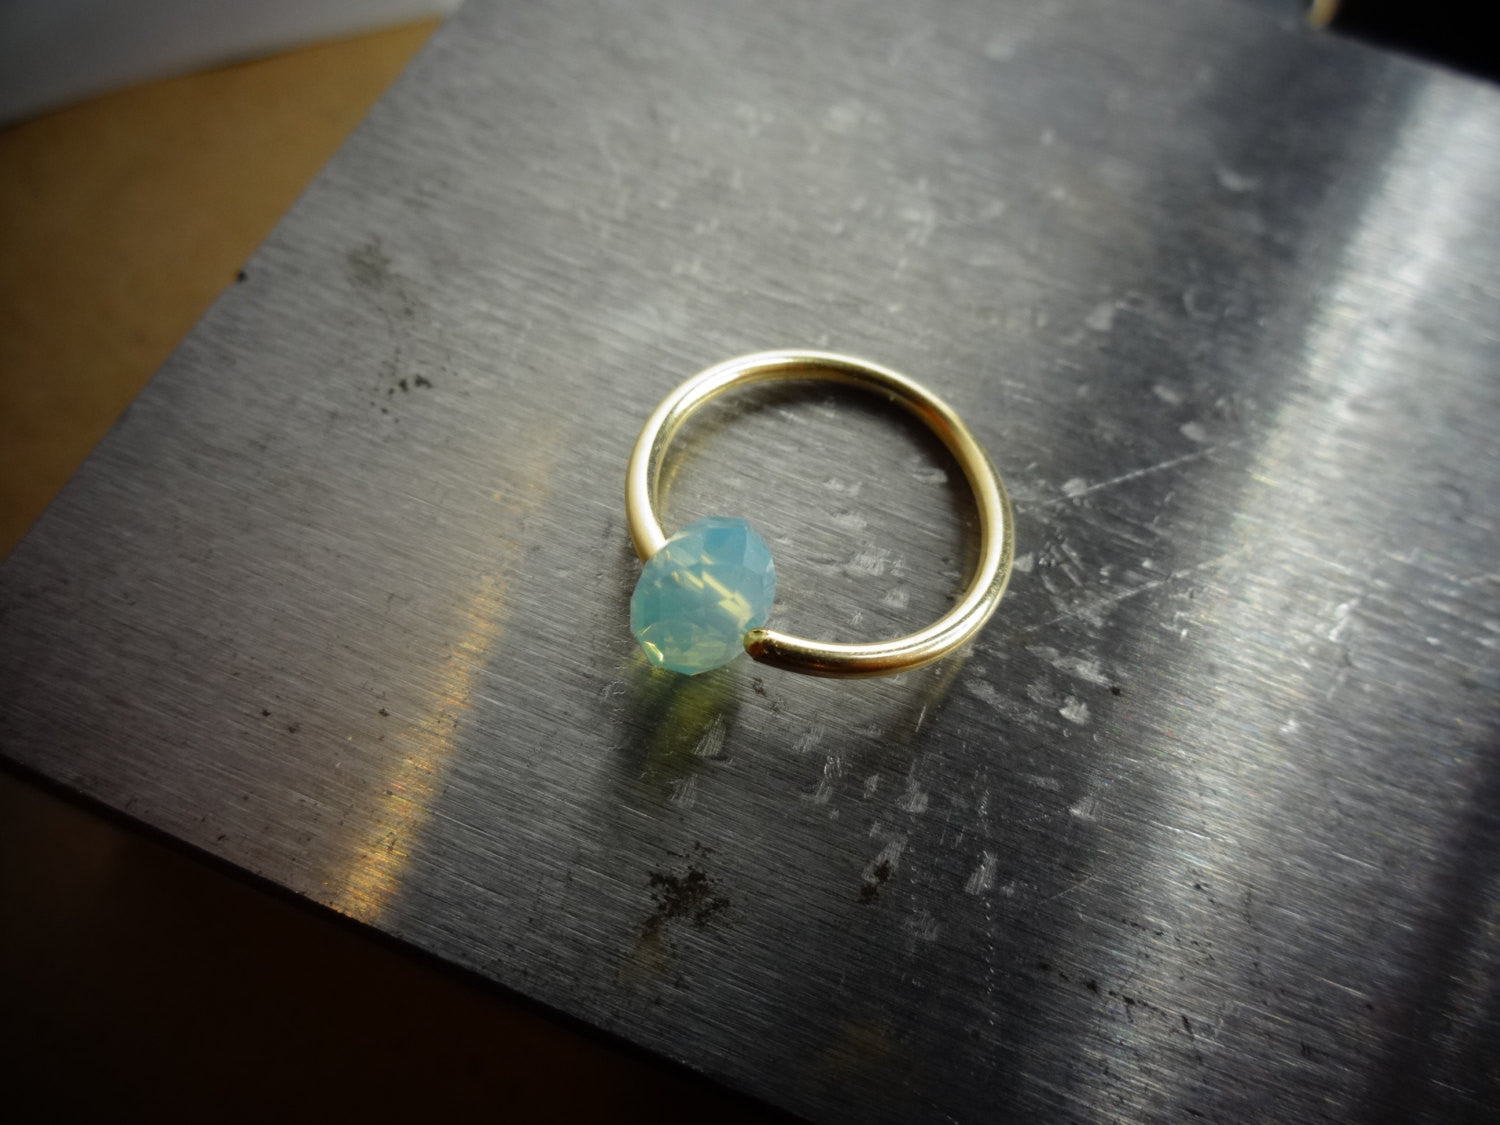 Captive Bead Ring made with OPAL BLUE Swarovski Crystal - 14 ga Hoop - 14k Gold (Y, W, or R), Sterling Silver, or Platinum